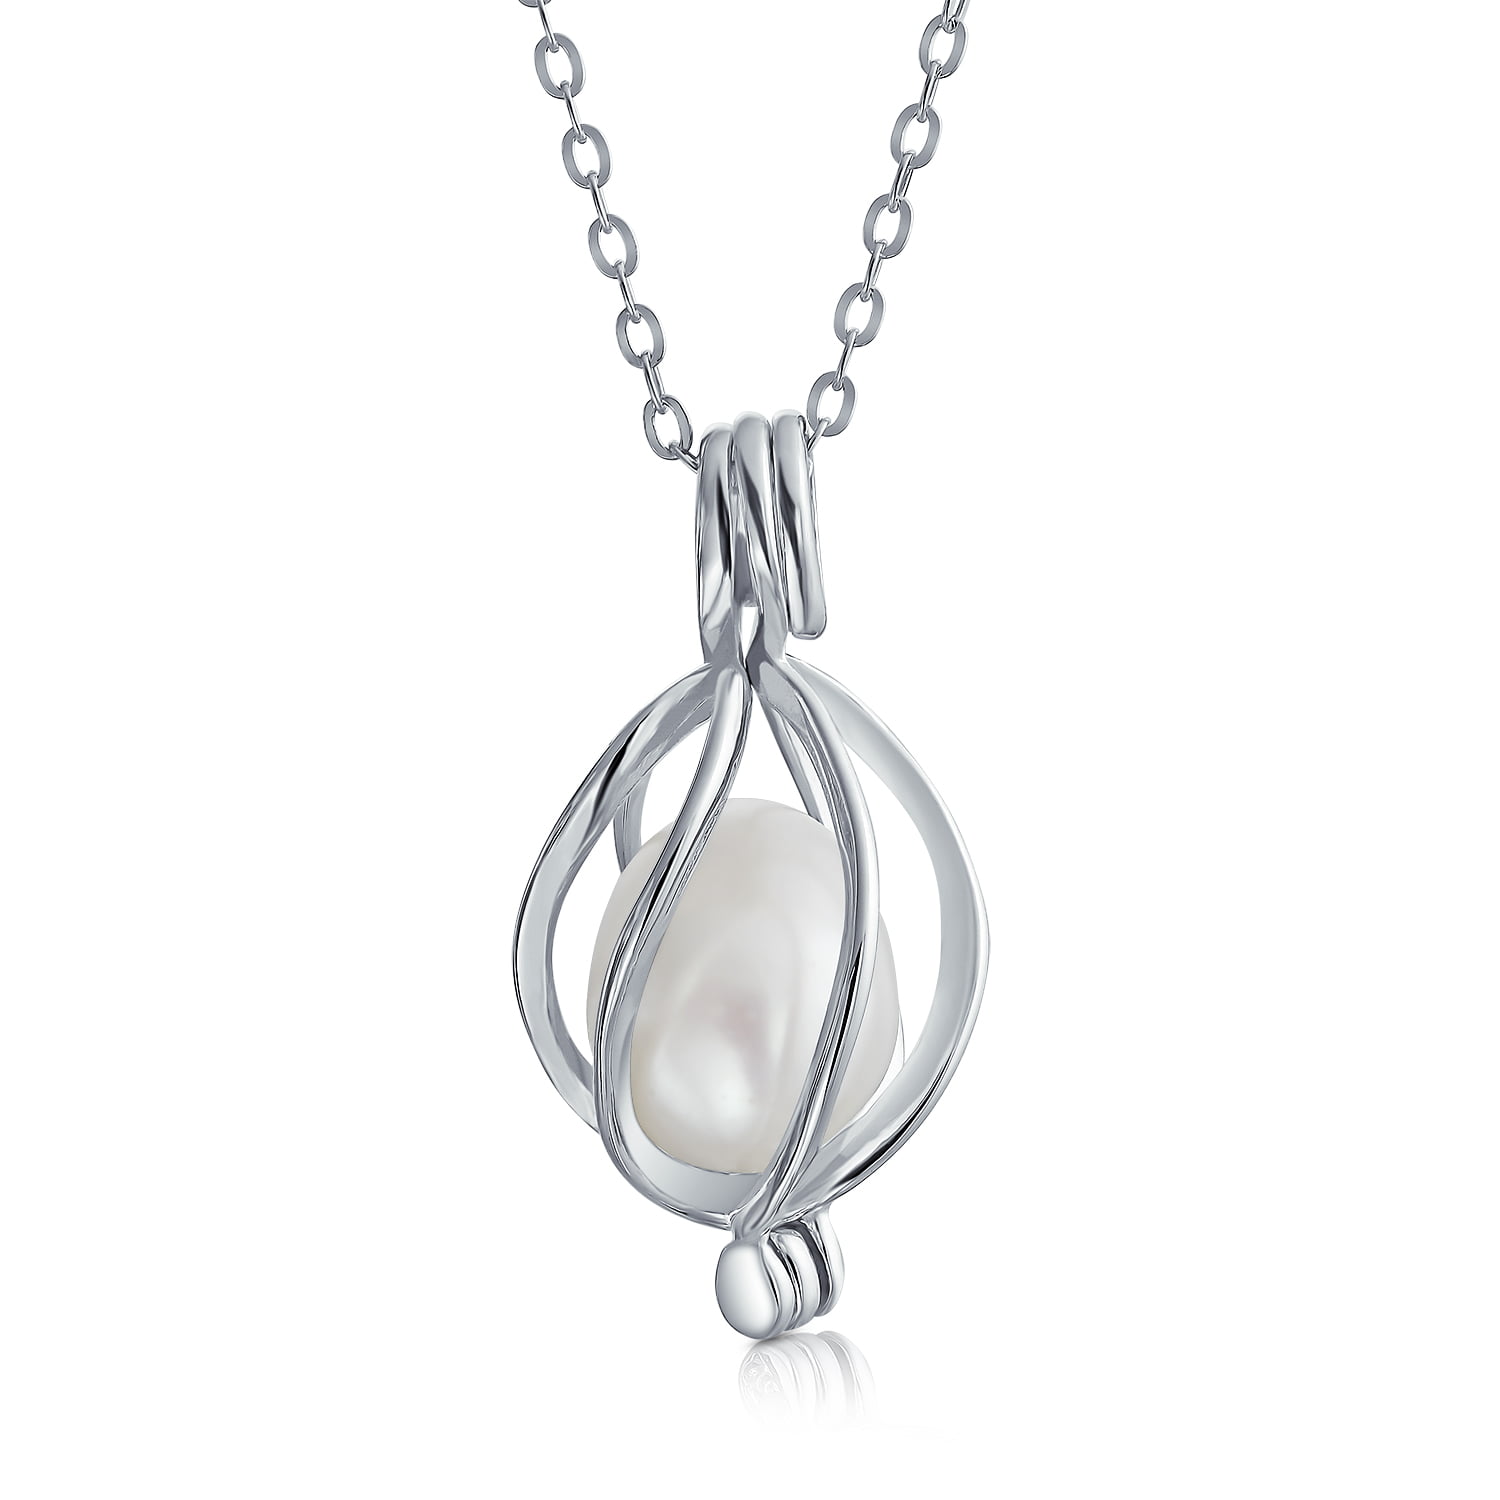 New Christmas Elves Silver Cage Pendant Akoya Oyster Pearl 20 Inches Chain